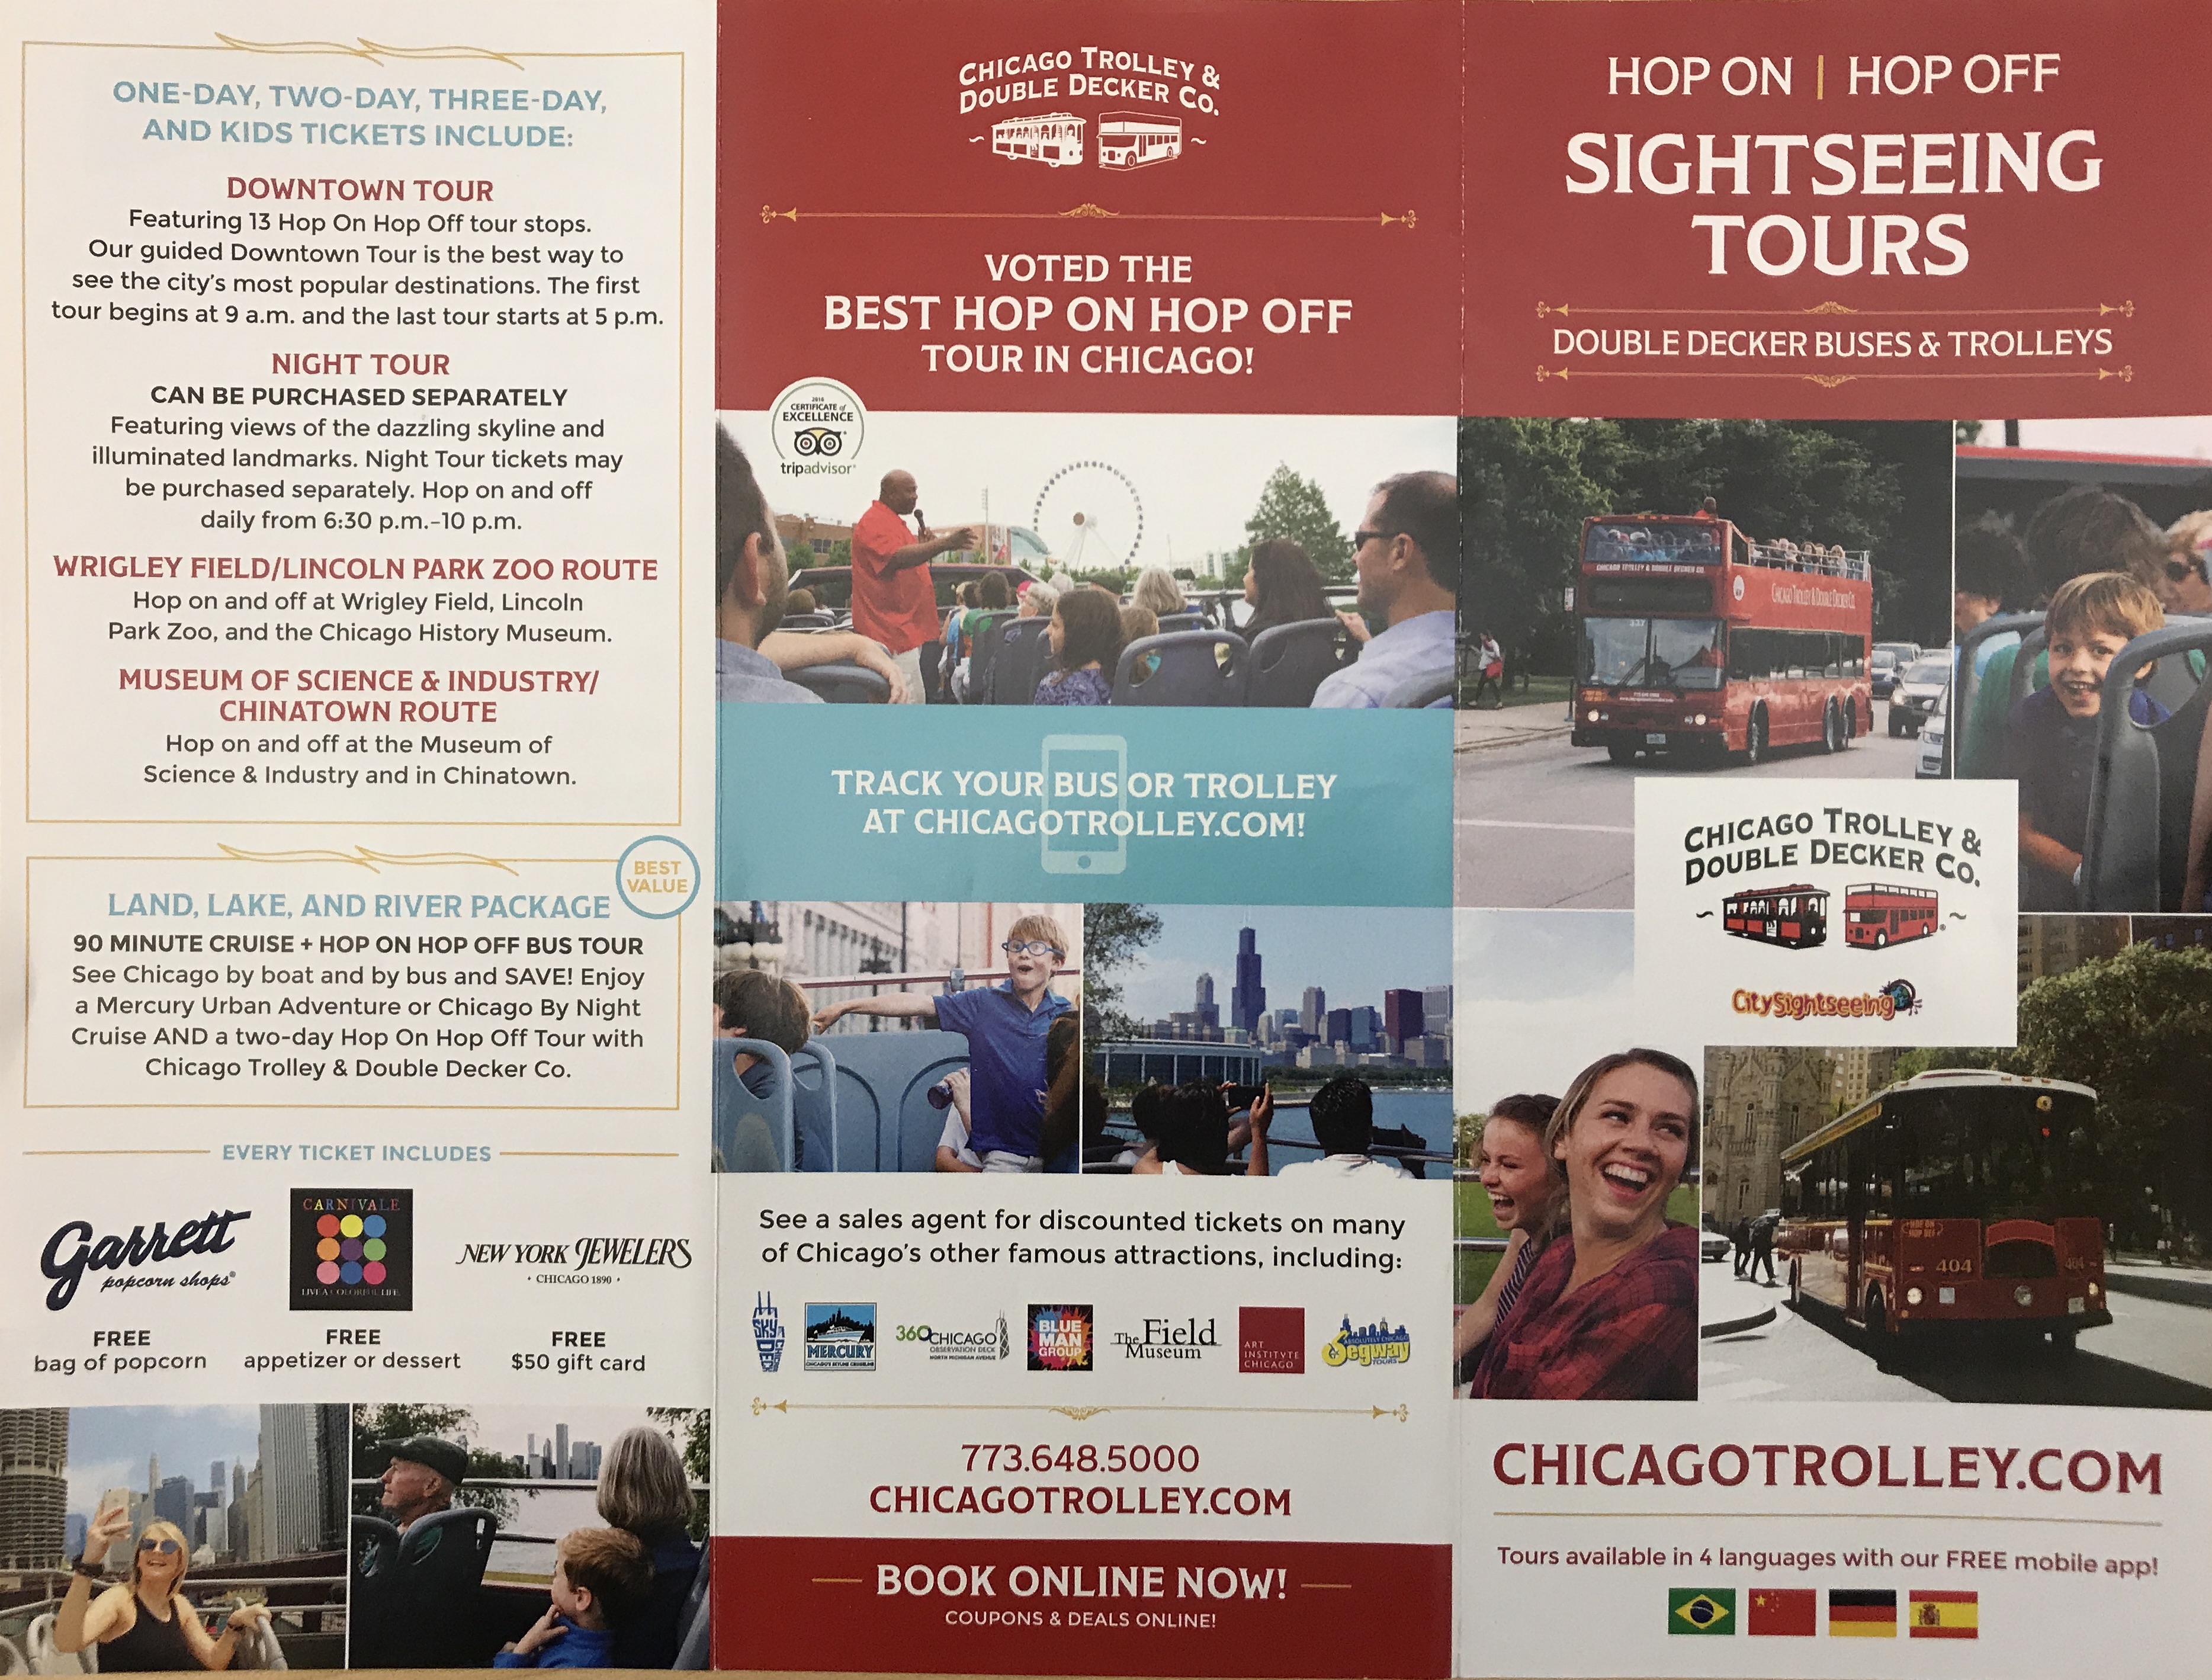 Chicago double decker and trolley tours Information pamphlet information 1